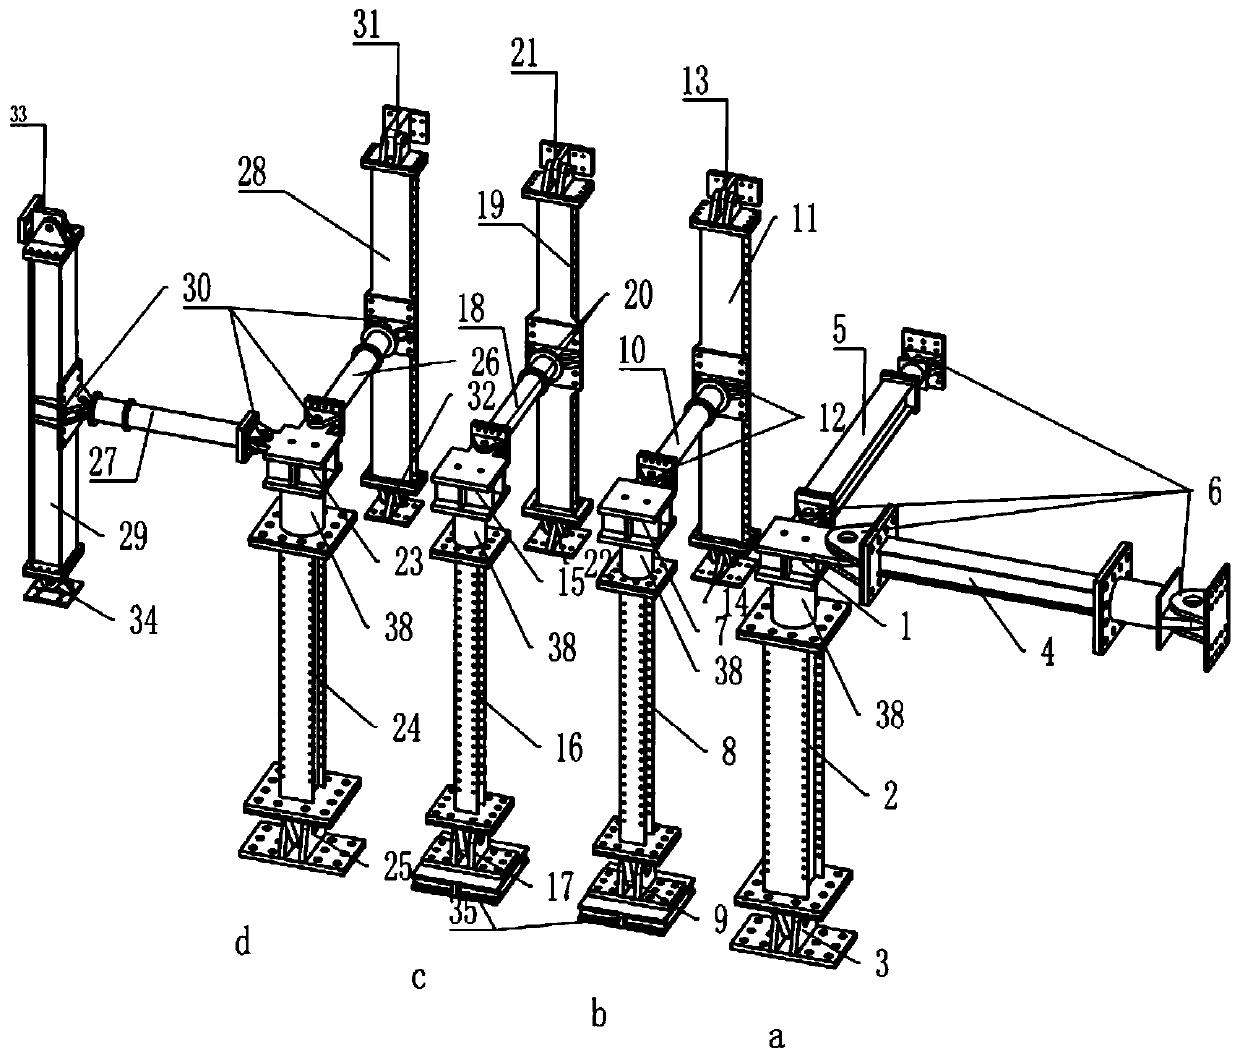 Adjustable stiffness support system for strength test of aircraft vertical stabilizer and fuselage connection